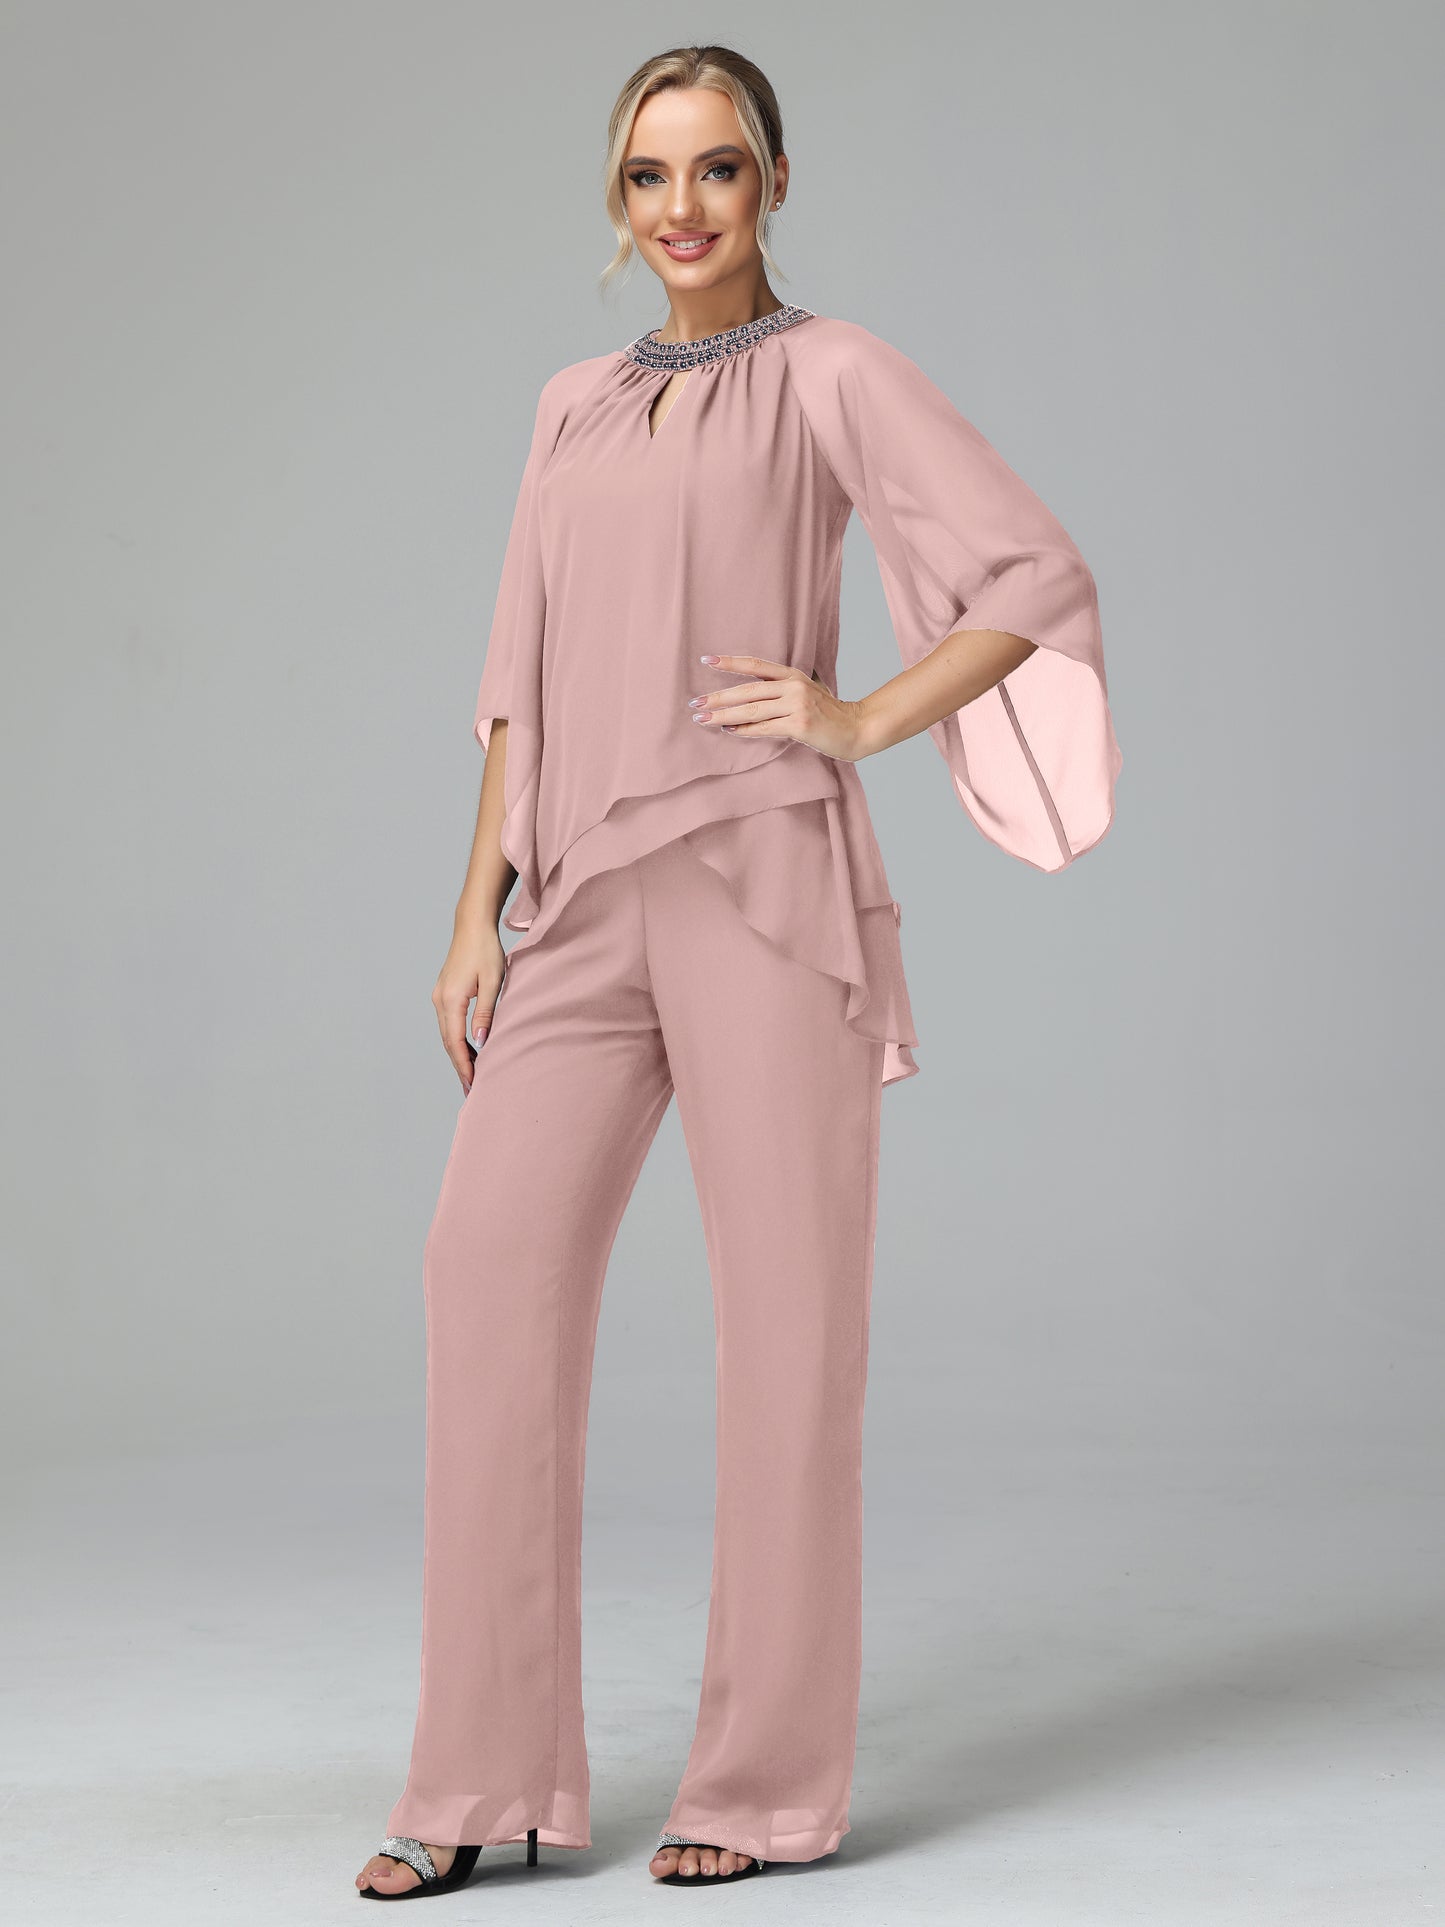 Long Sleeves Chiffon Mother Of The Bride Dress Pants Suits